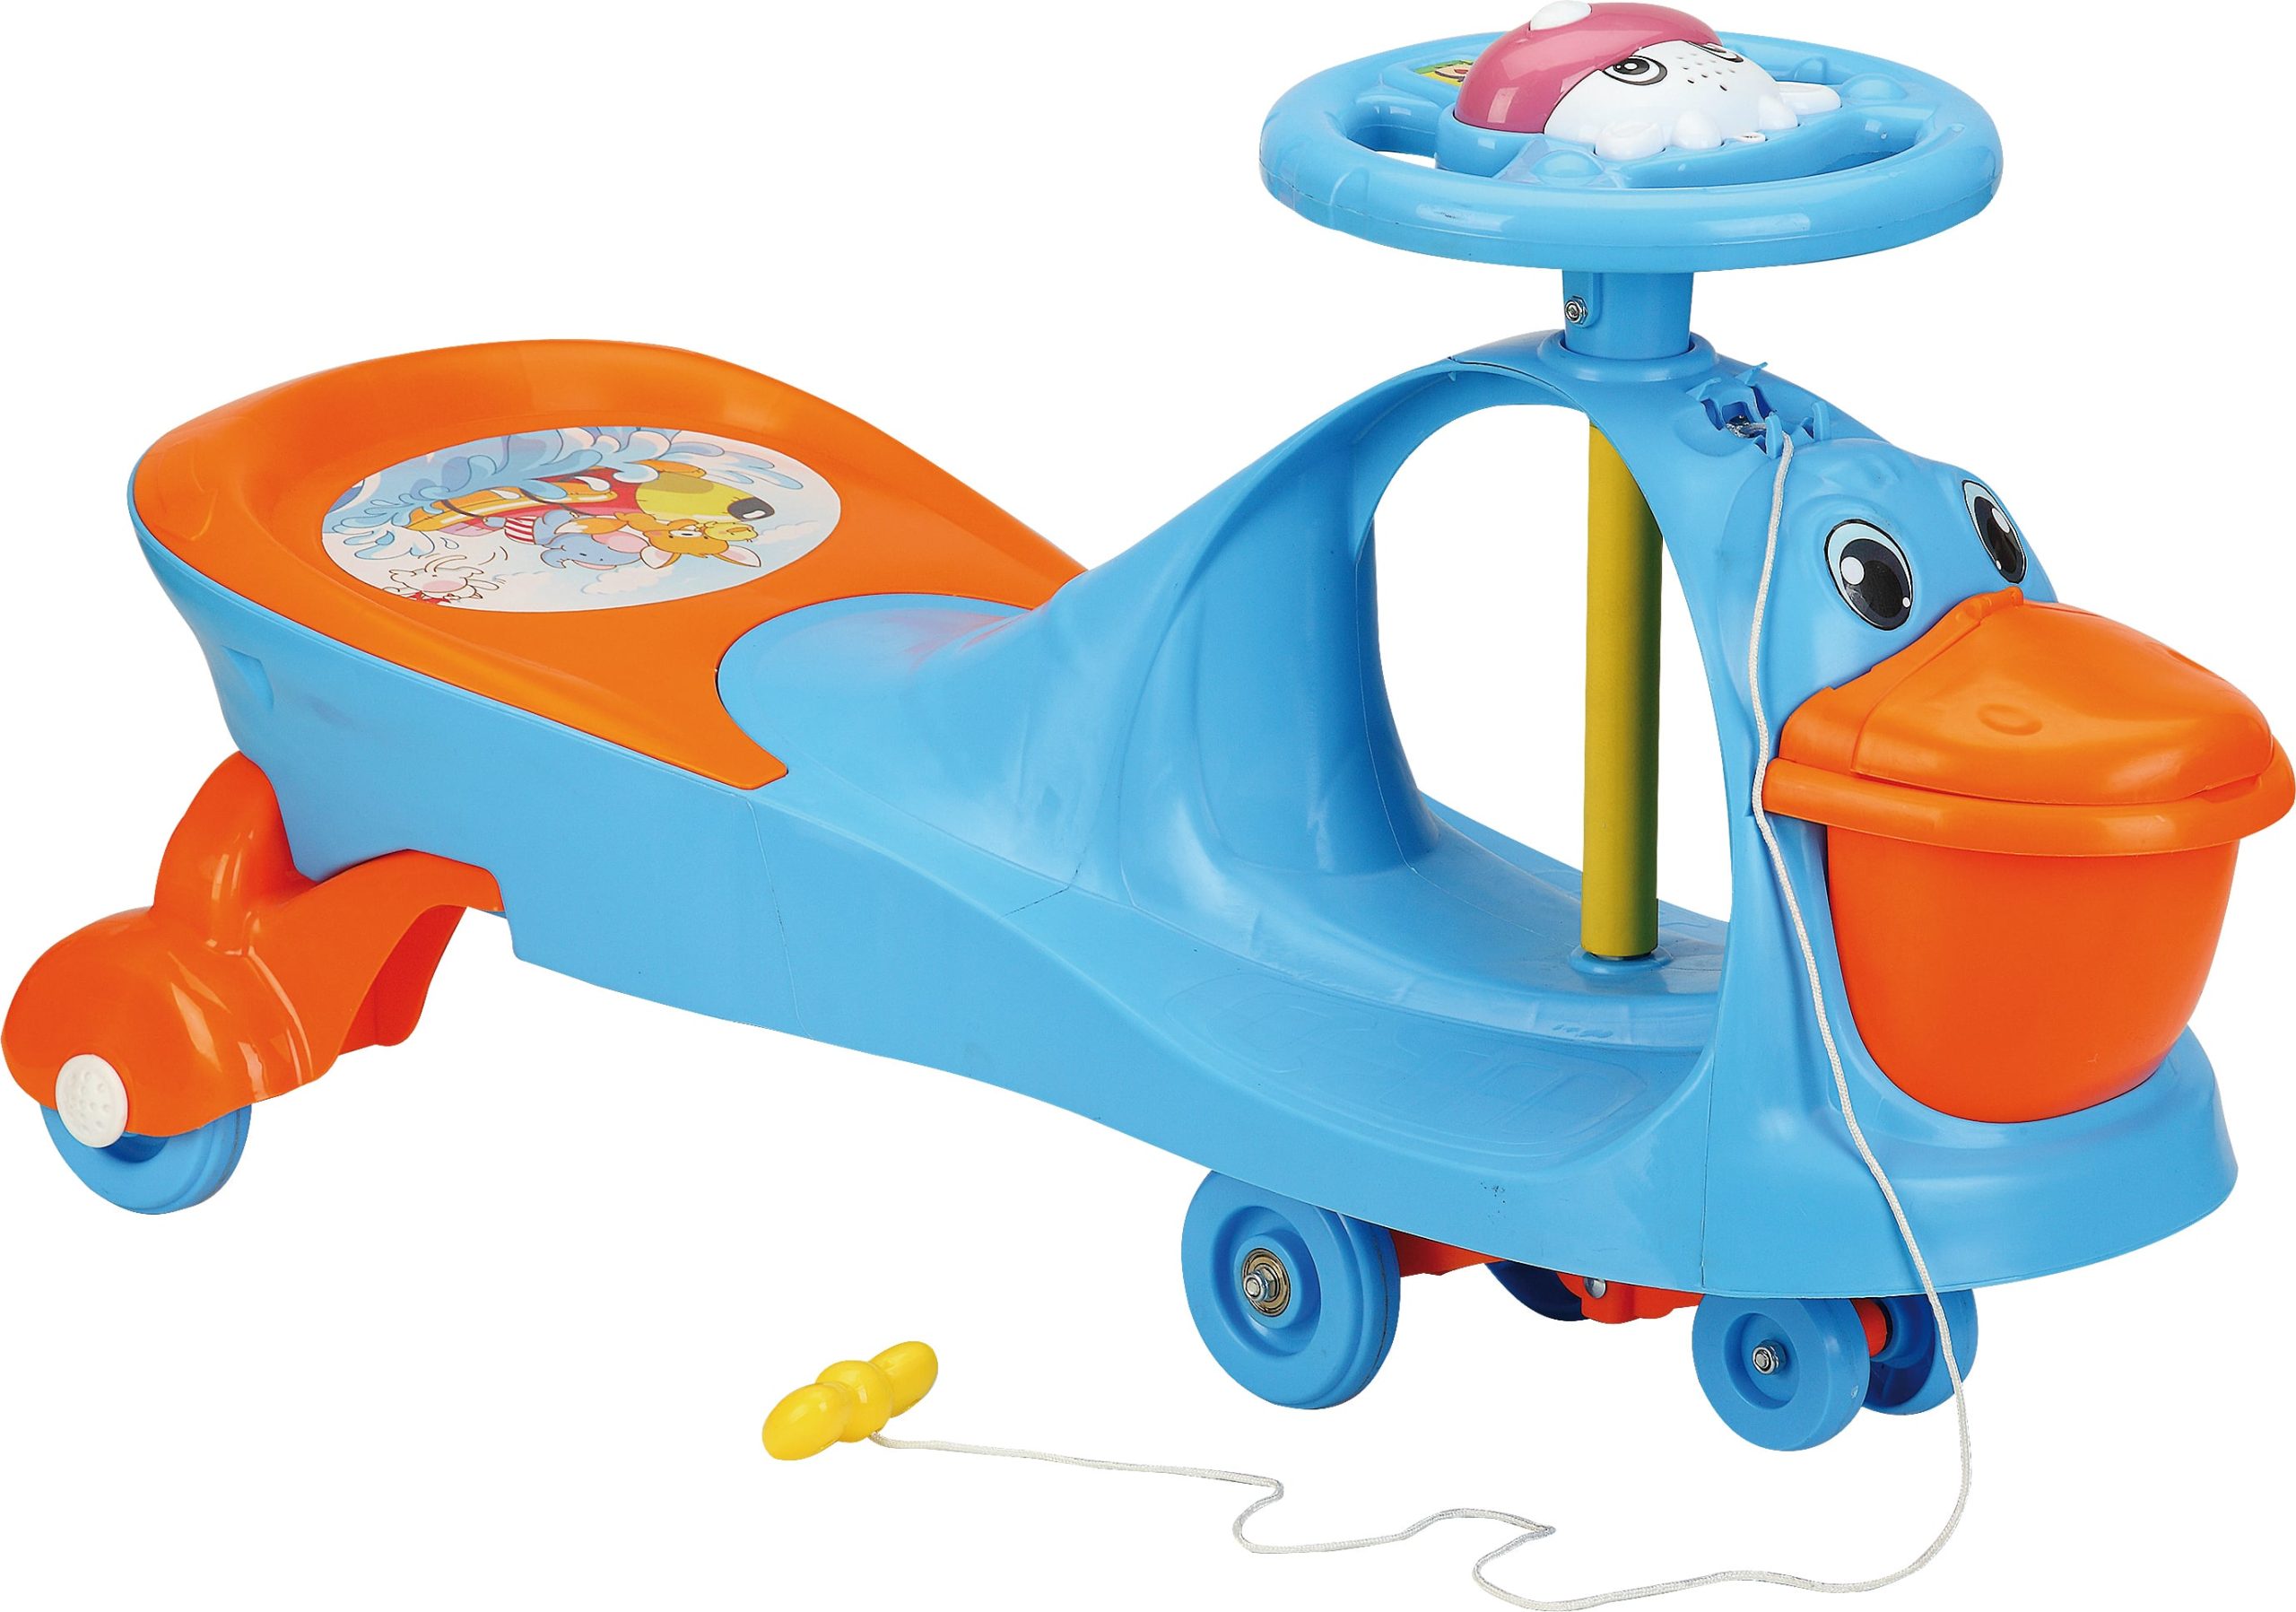 Kids Twisting Car with Swing - Duck